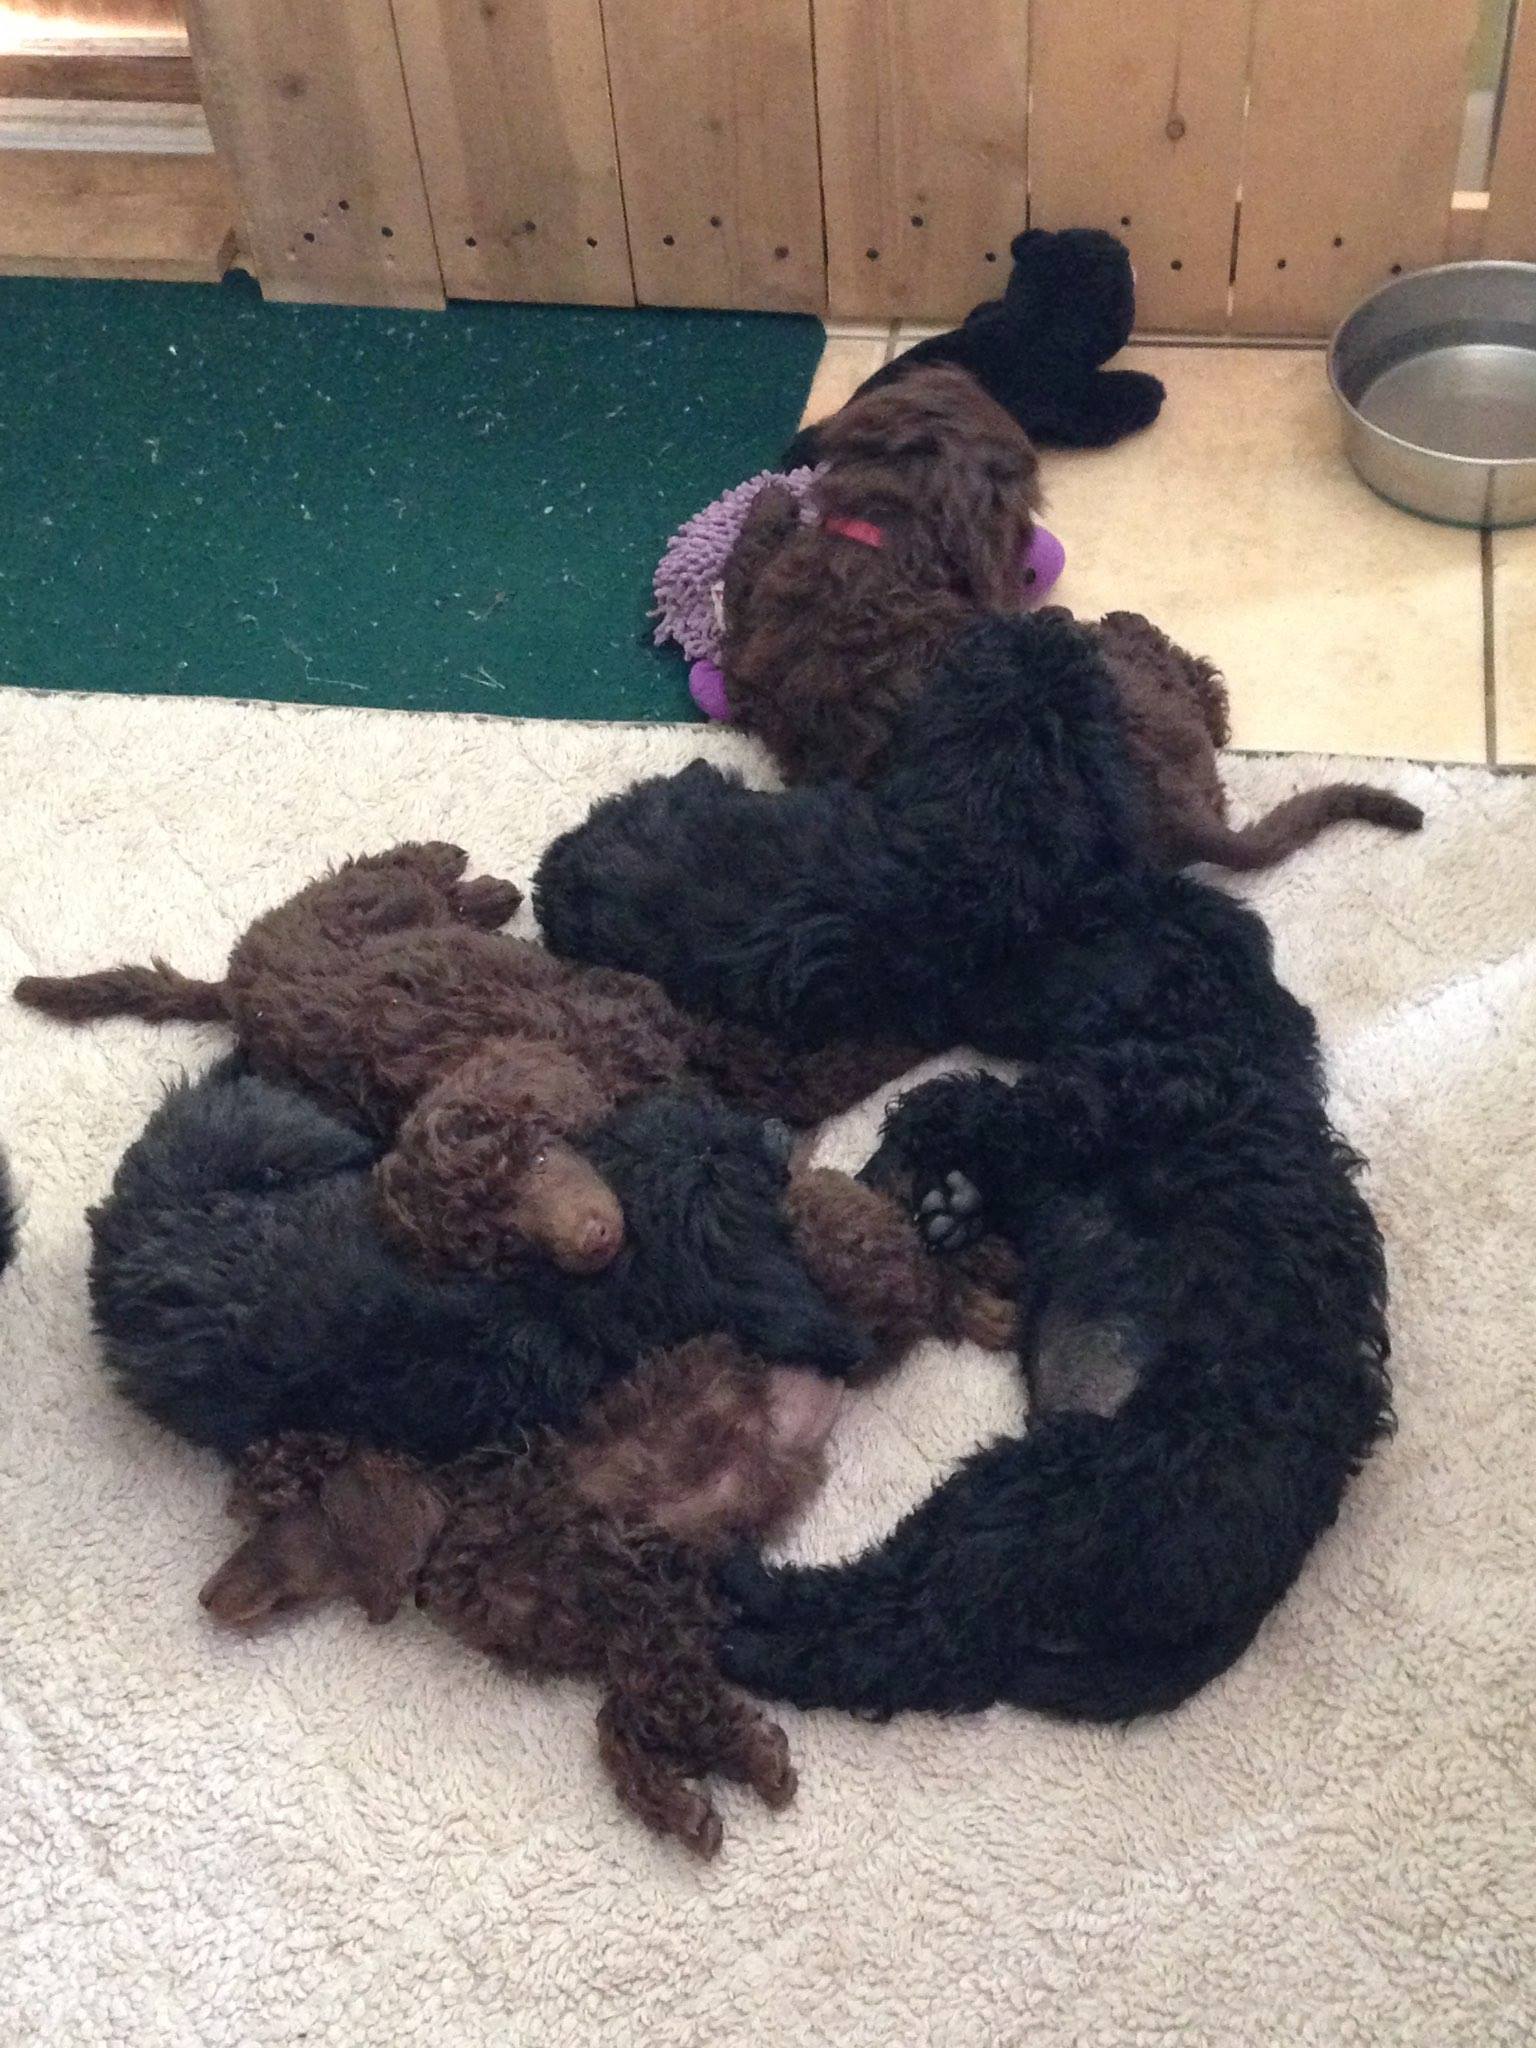 Happy 1 year birthday to the Russo x Carly litter of Karbit Poodles.